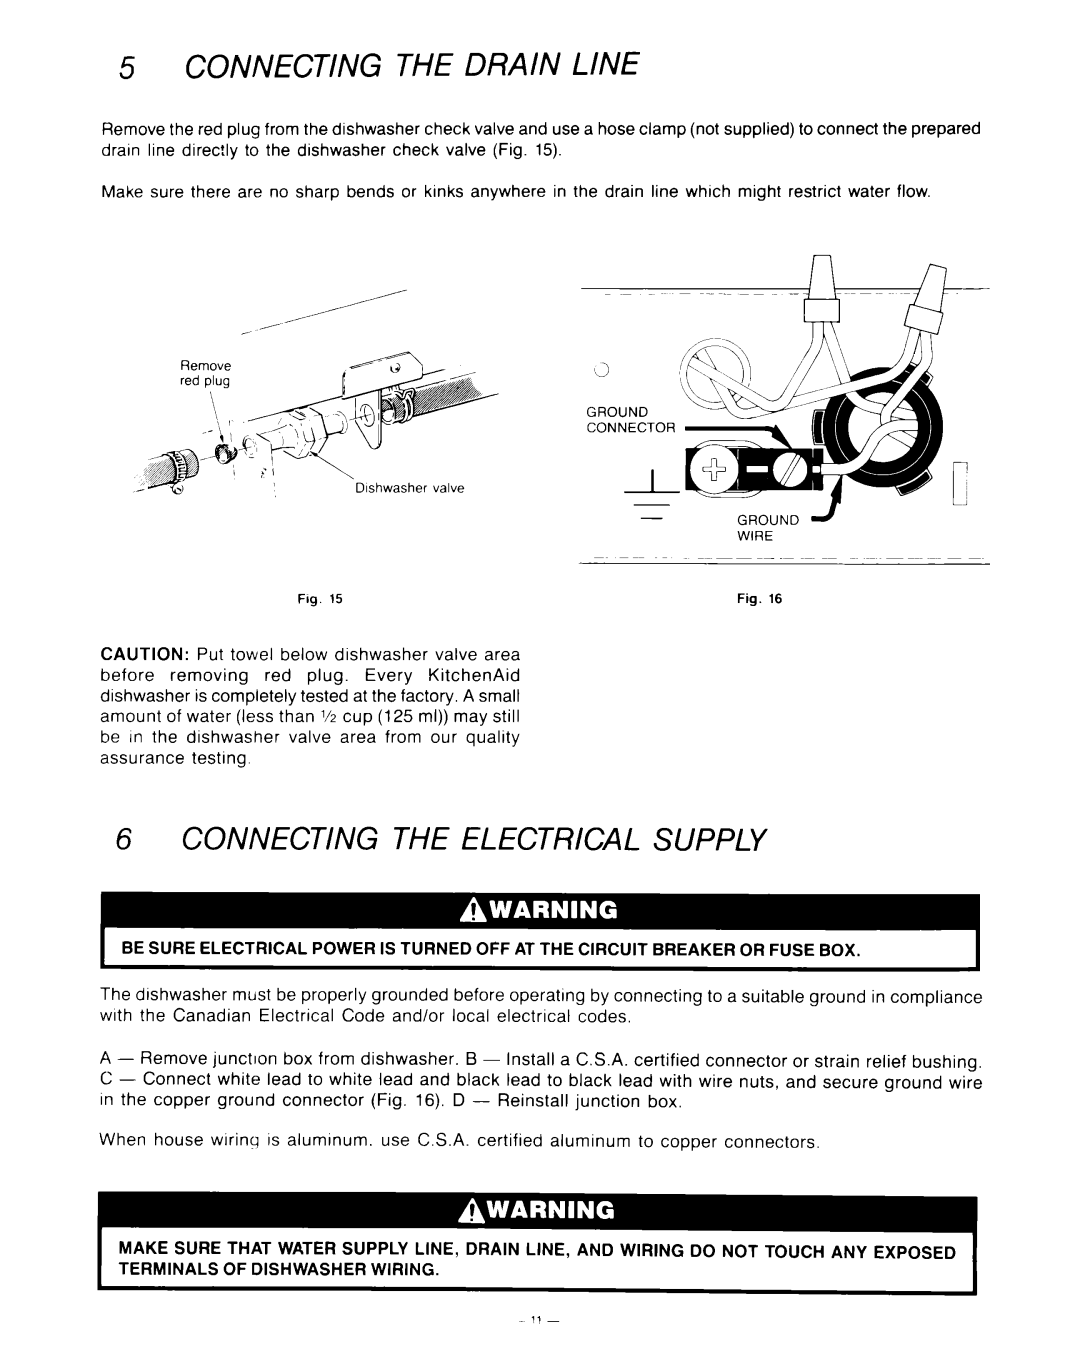 KitchenAid KUD-22 manual Connecting The Drain Line, Connecting The Electrical Supply, connector, C.S.A 